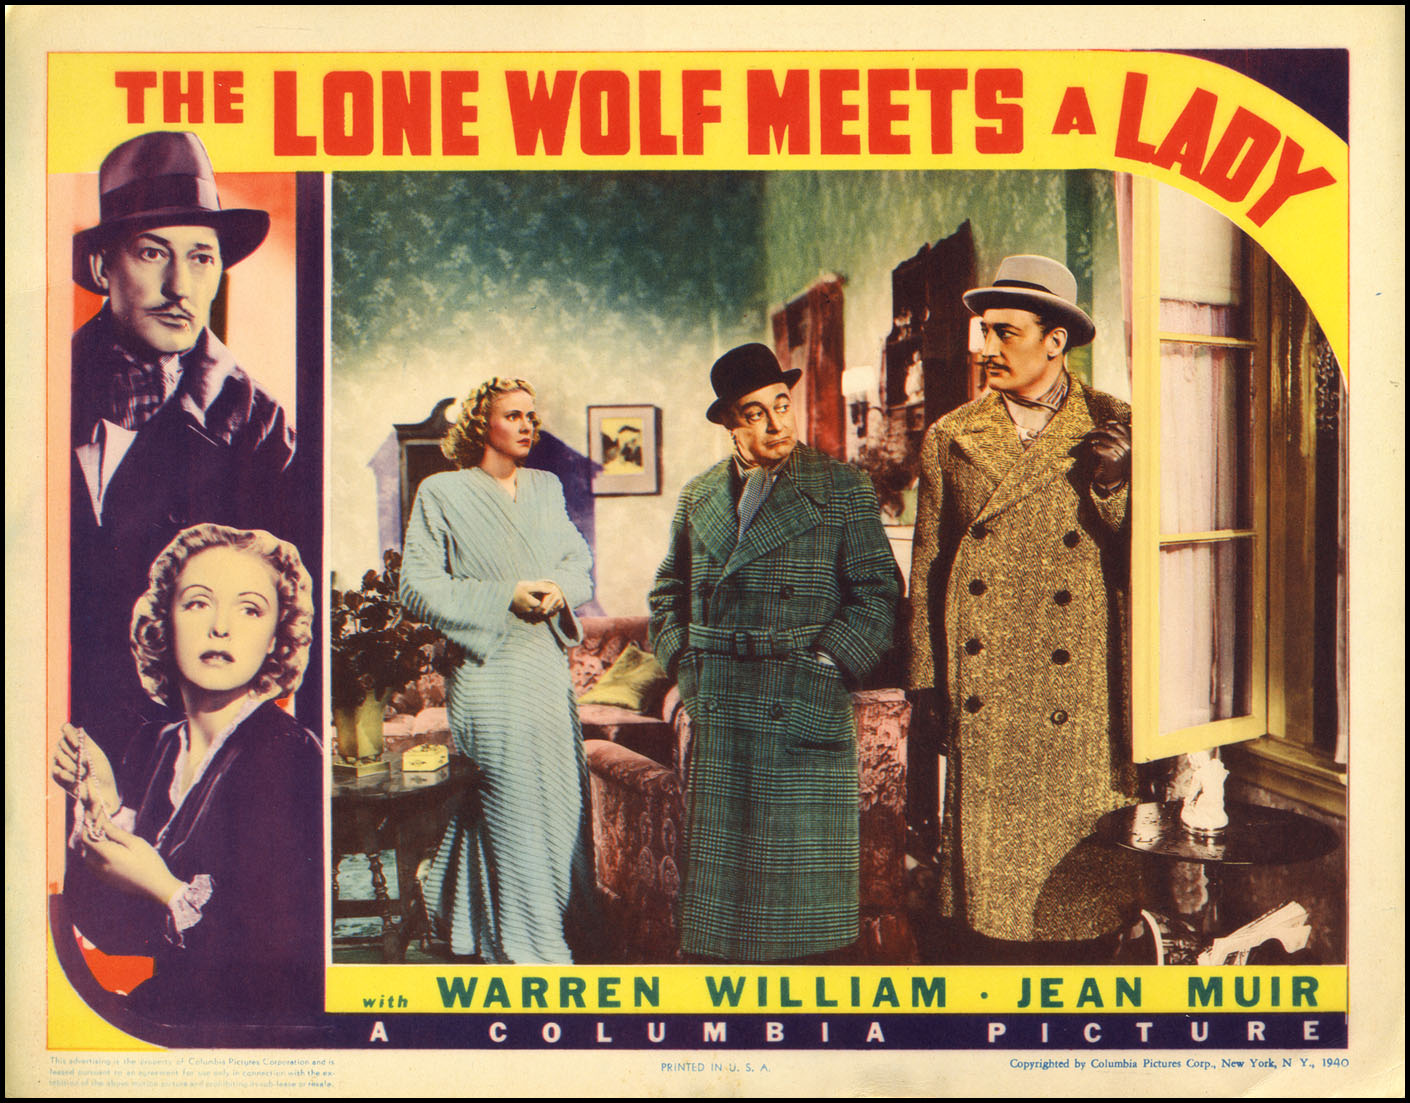 The Lone Wolf Meets a Lady movie